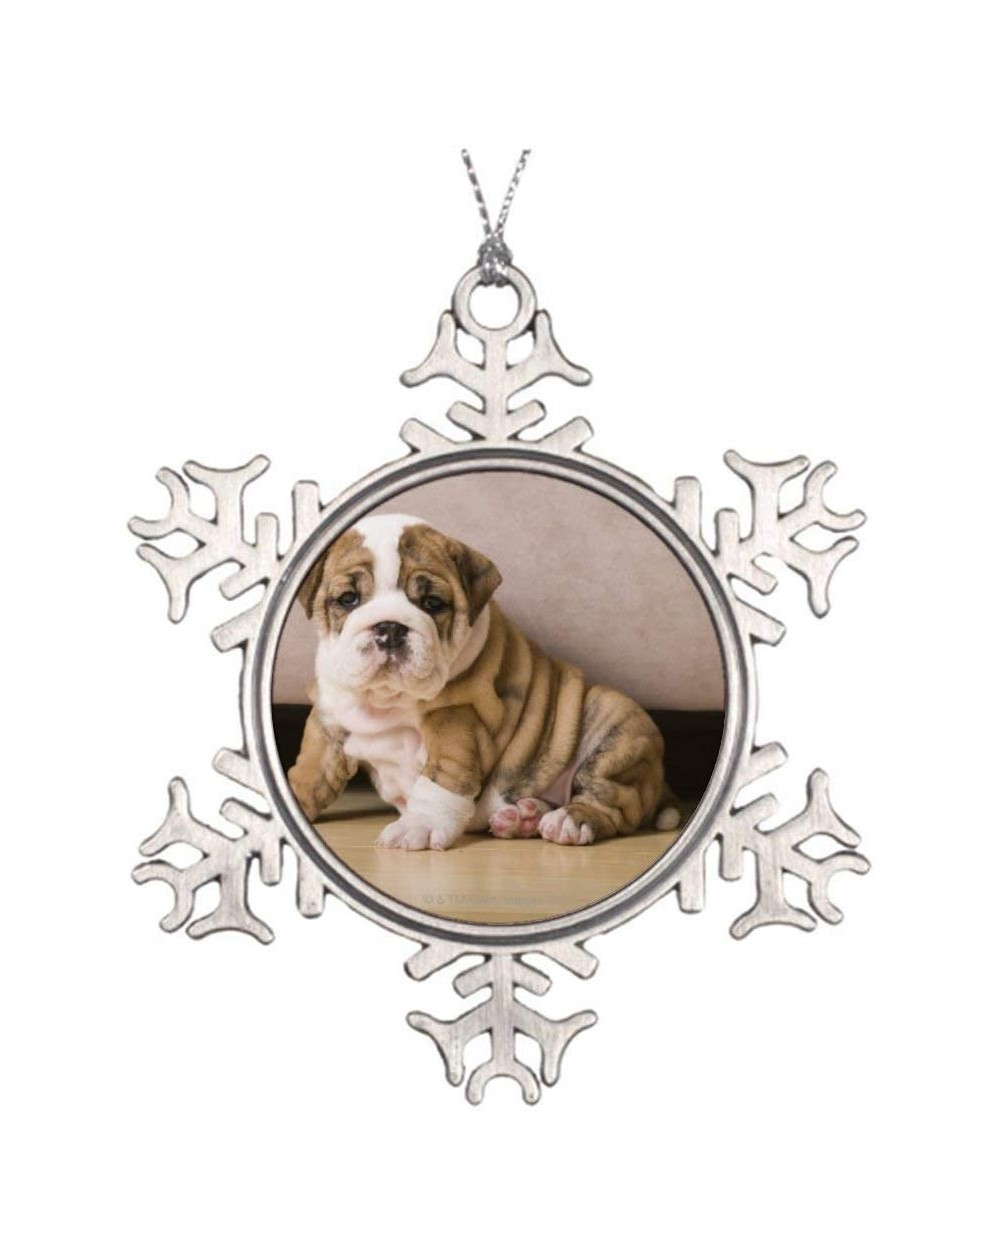 Ornaments Christmas Ornaments- English Bulldog Puppies Ornament Tree Hanging Decor Gift for Families Friends-3 Inch - Style17...